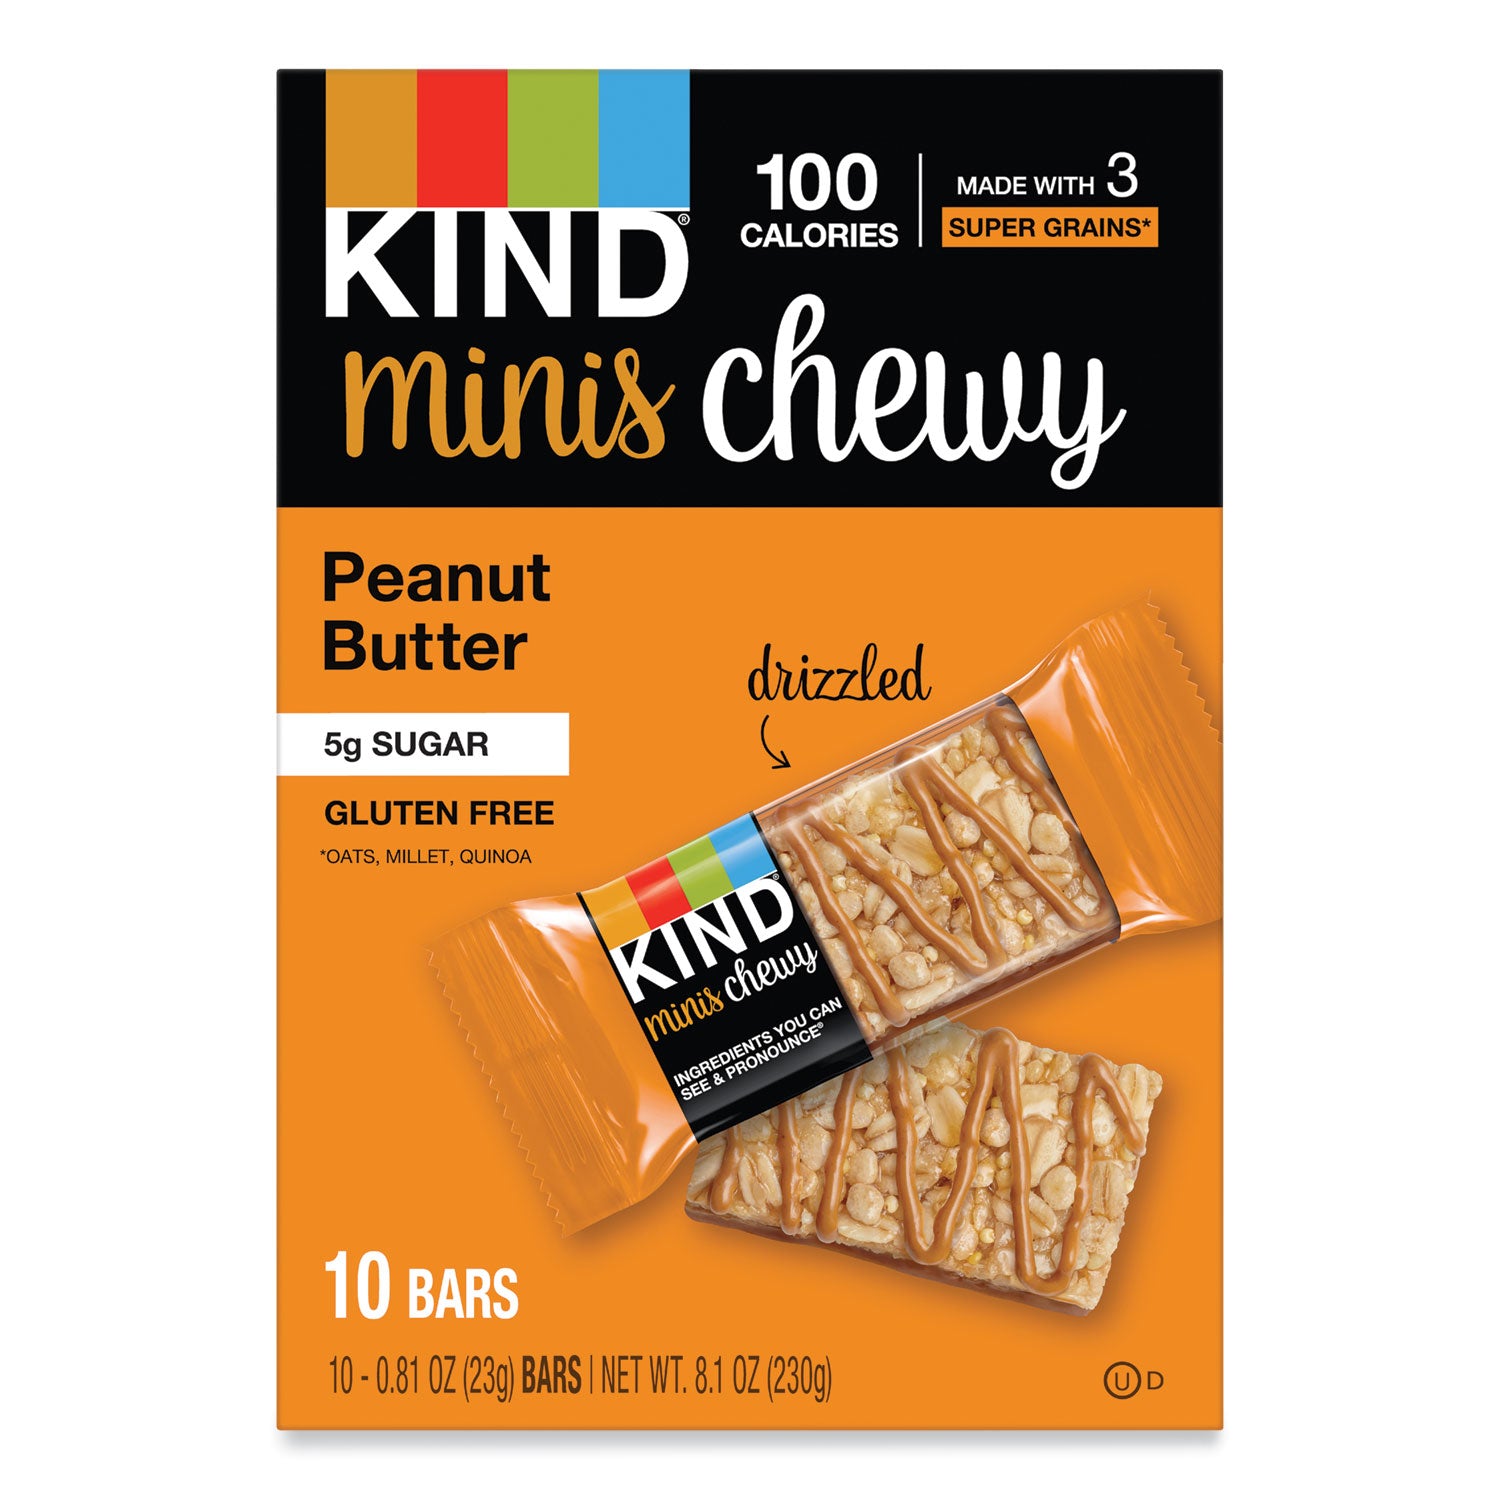 minis-chewy-peanut-butter-081-oz-10-pack_knd27895 - 1